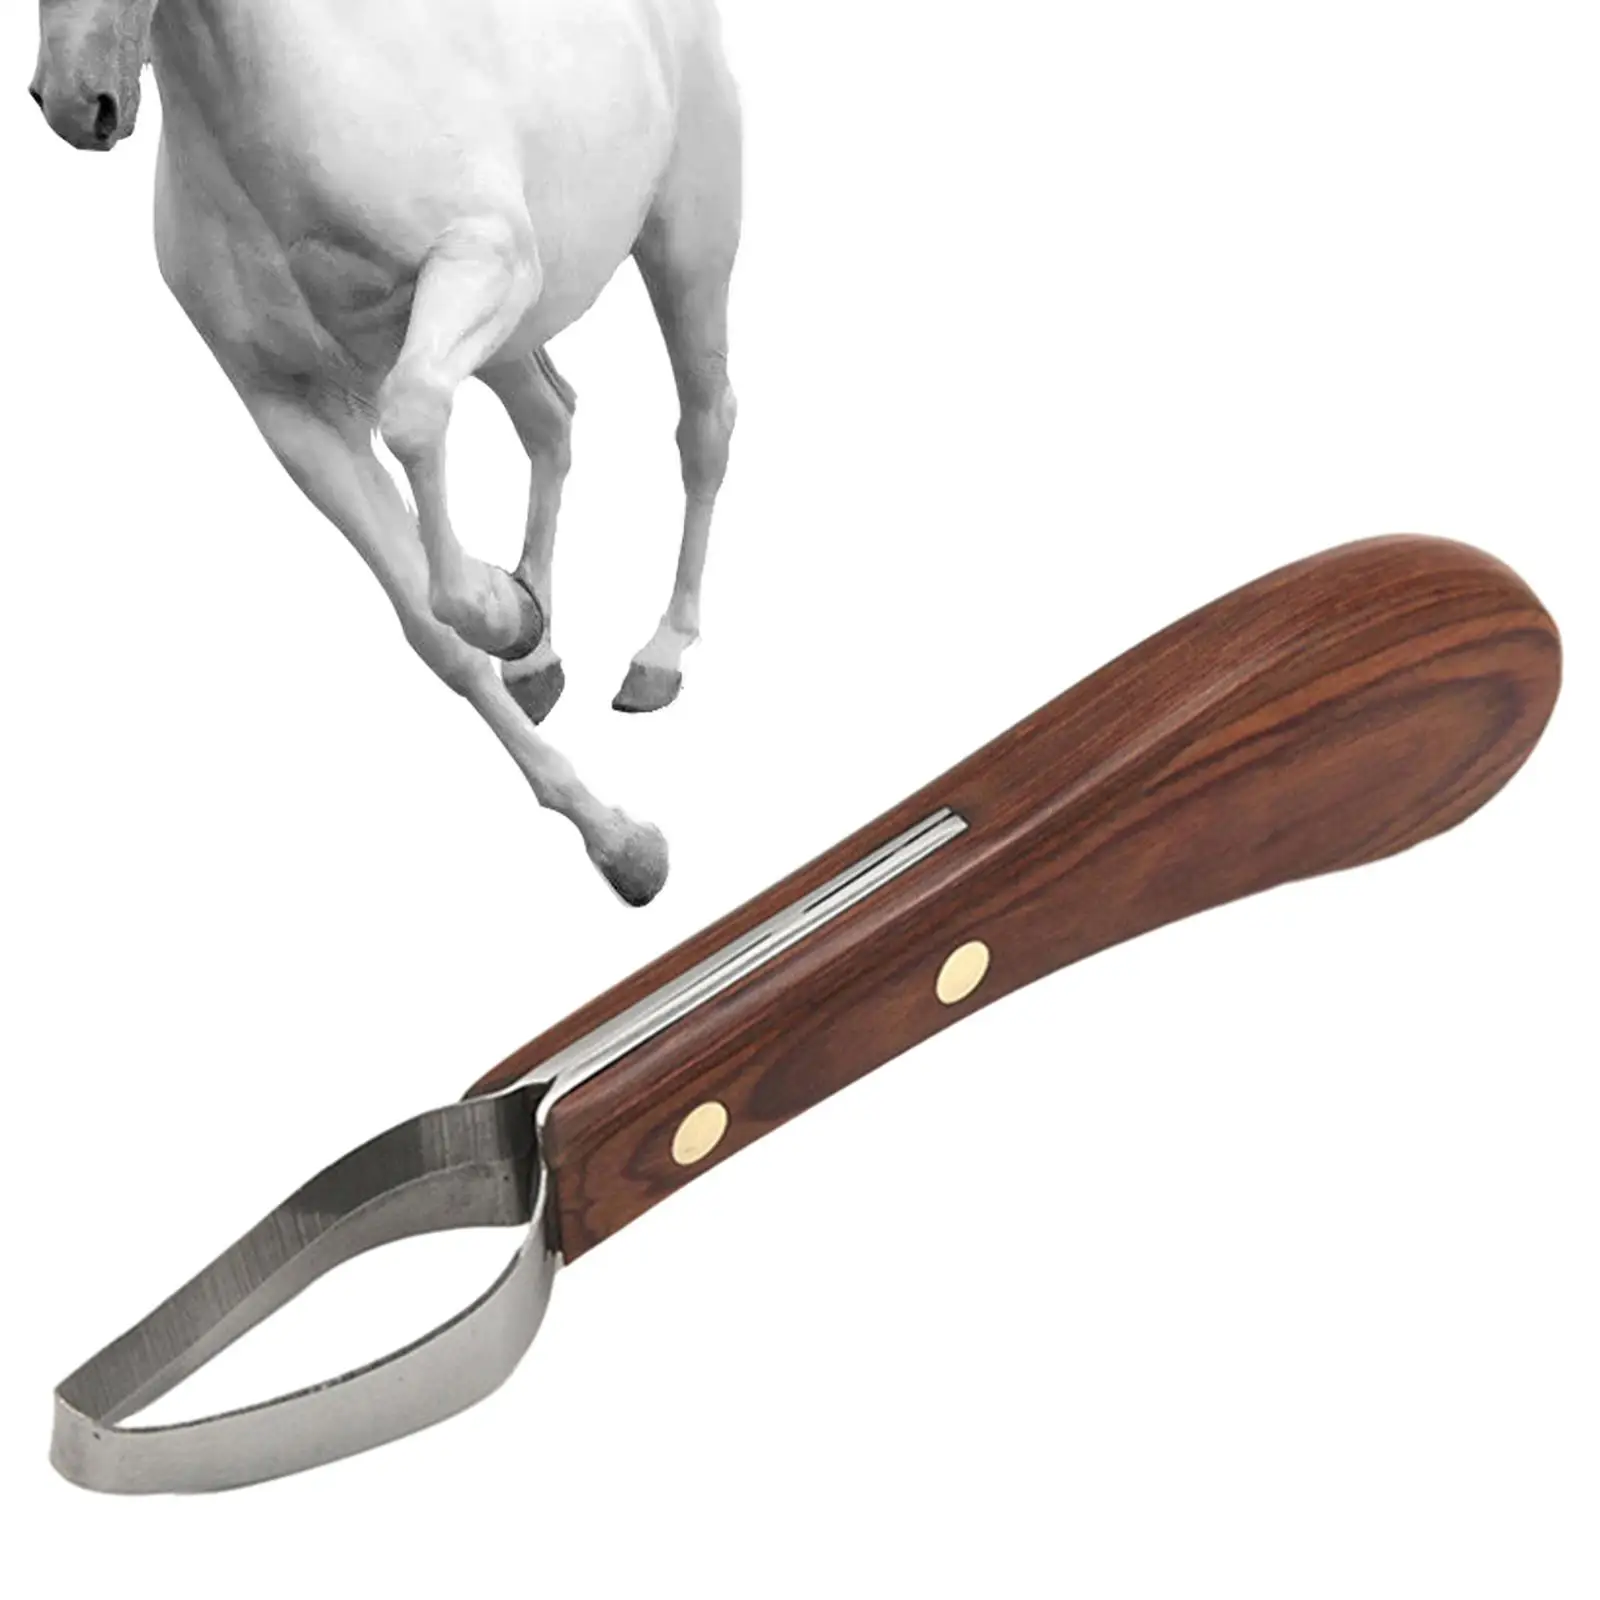 Horse Hoof Knife Multipurpose Smooth Farrier Tools Horseshoes Repairing Tools for Goats Farm Animal Livestock Supplies